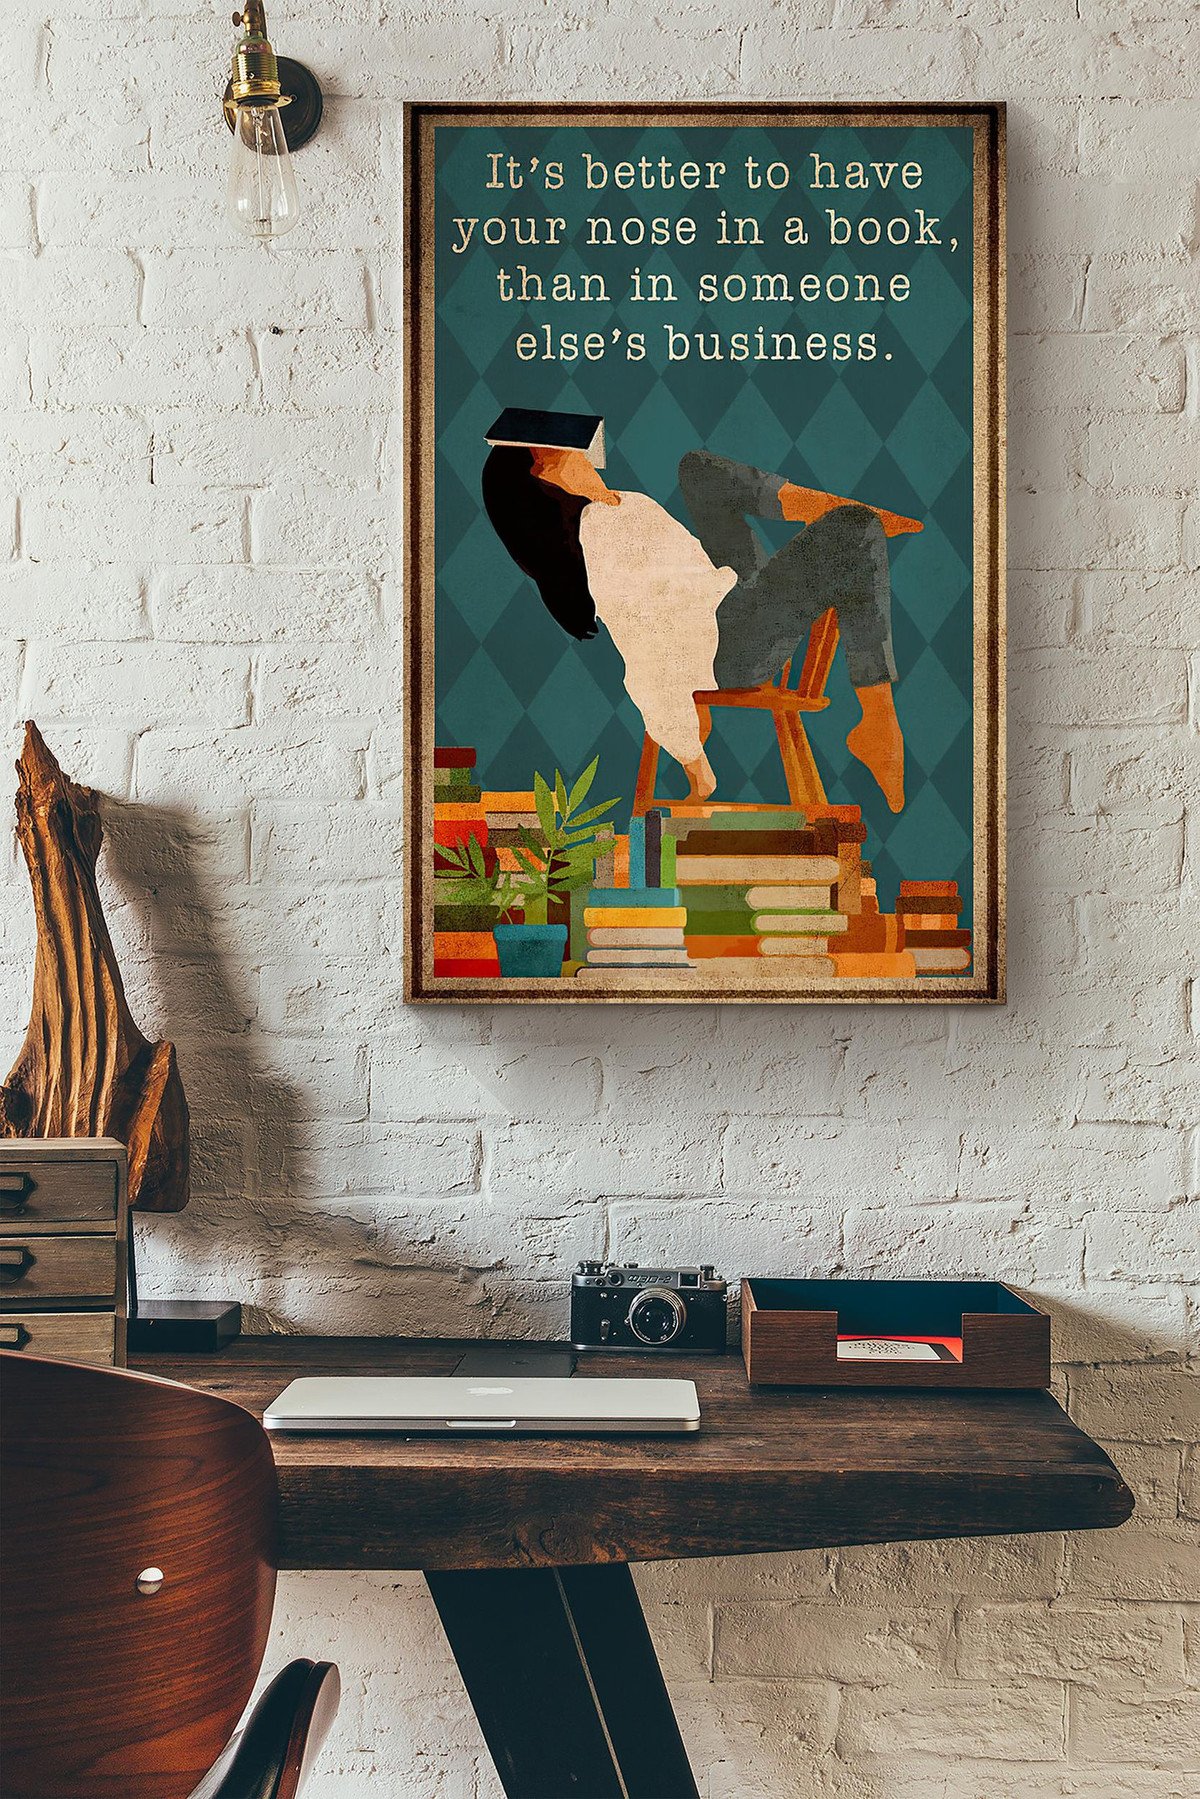 Its Better To Have Your Nose In A Book Than In Someone Elses Business Canvas Painting Ideas, Canvas Hanging Prints, Gift Idea Framed Prints, Canvas Paintings Wrapped Canvas 8x10